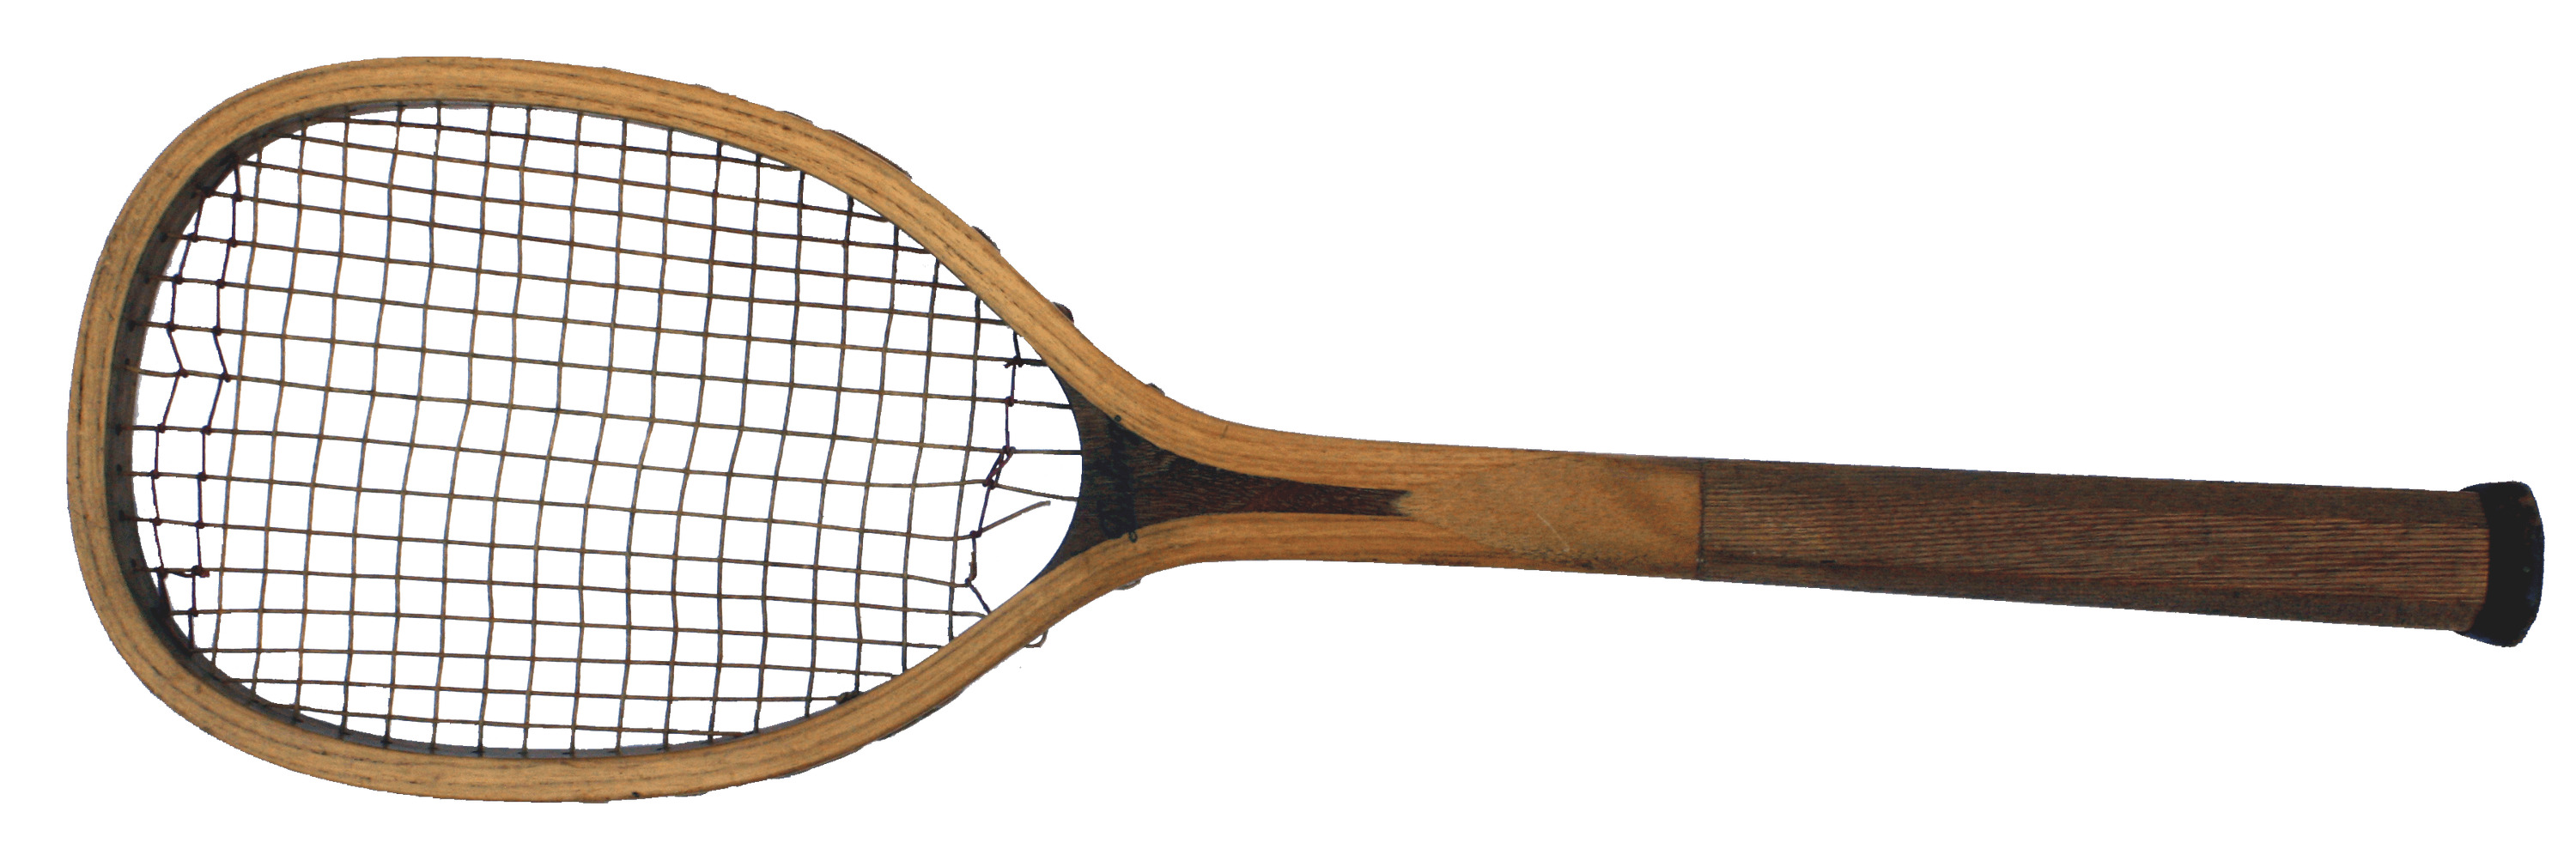 Antique Tennis Racket PNG icons